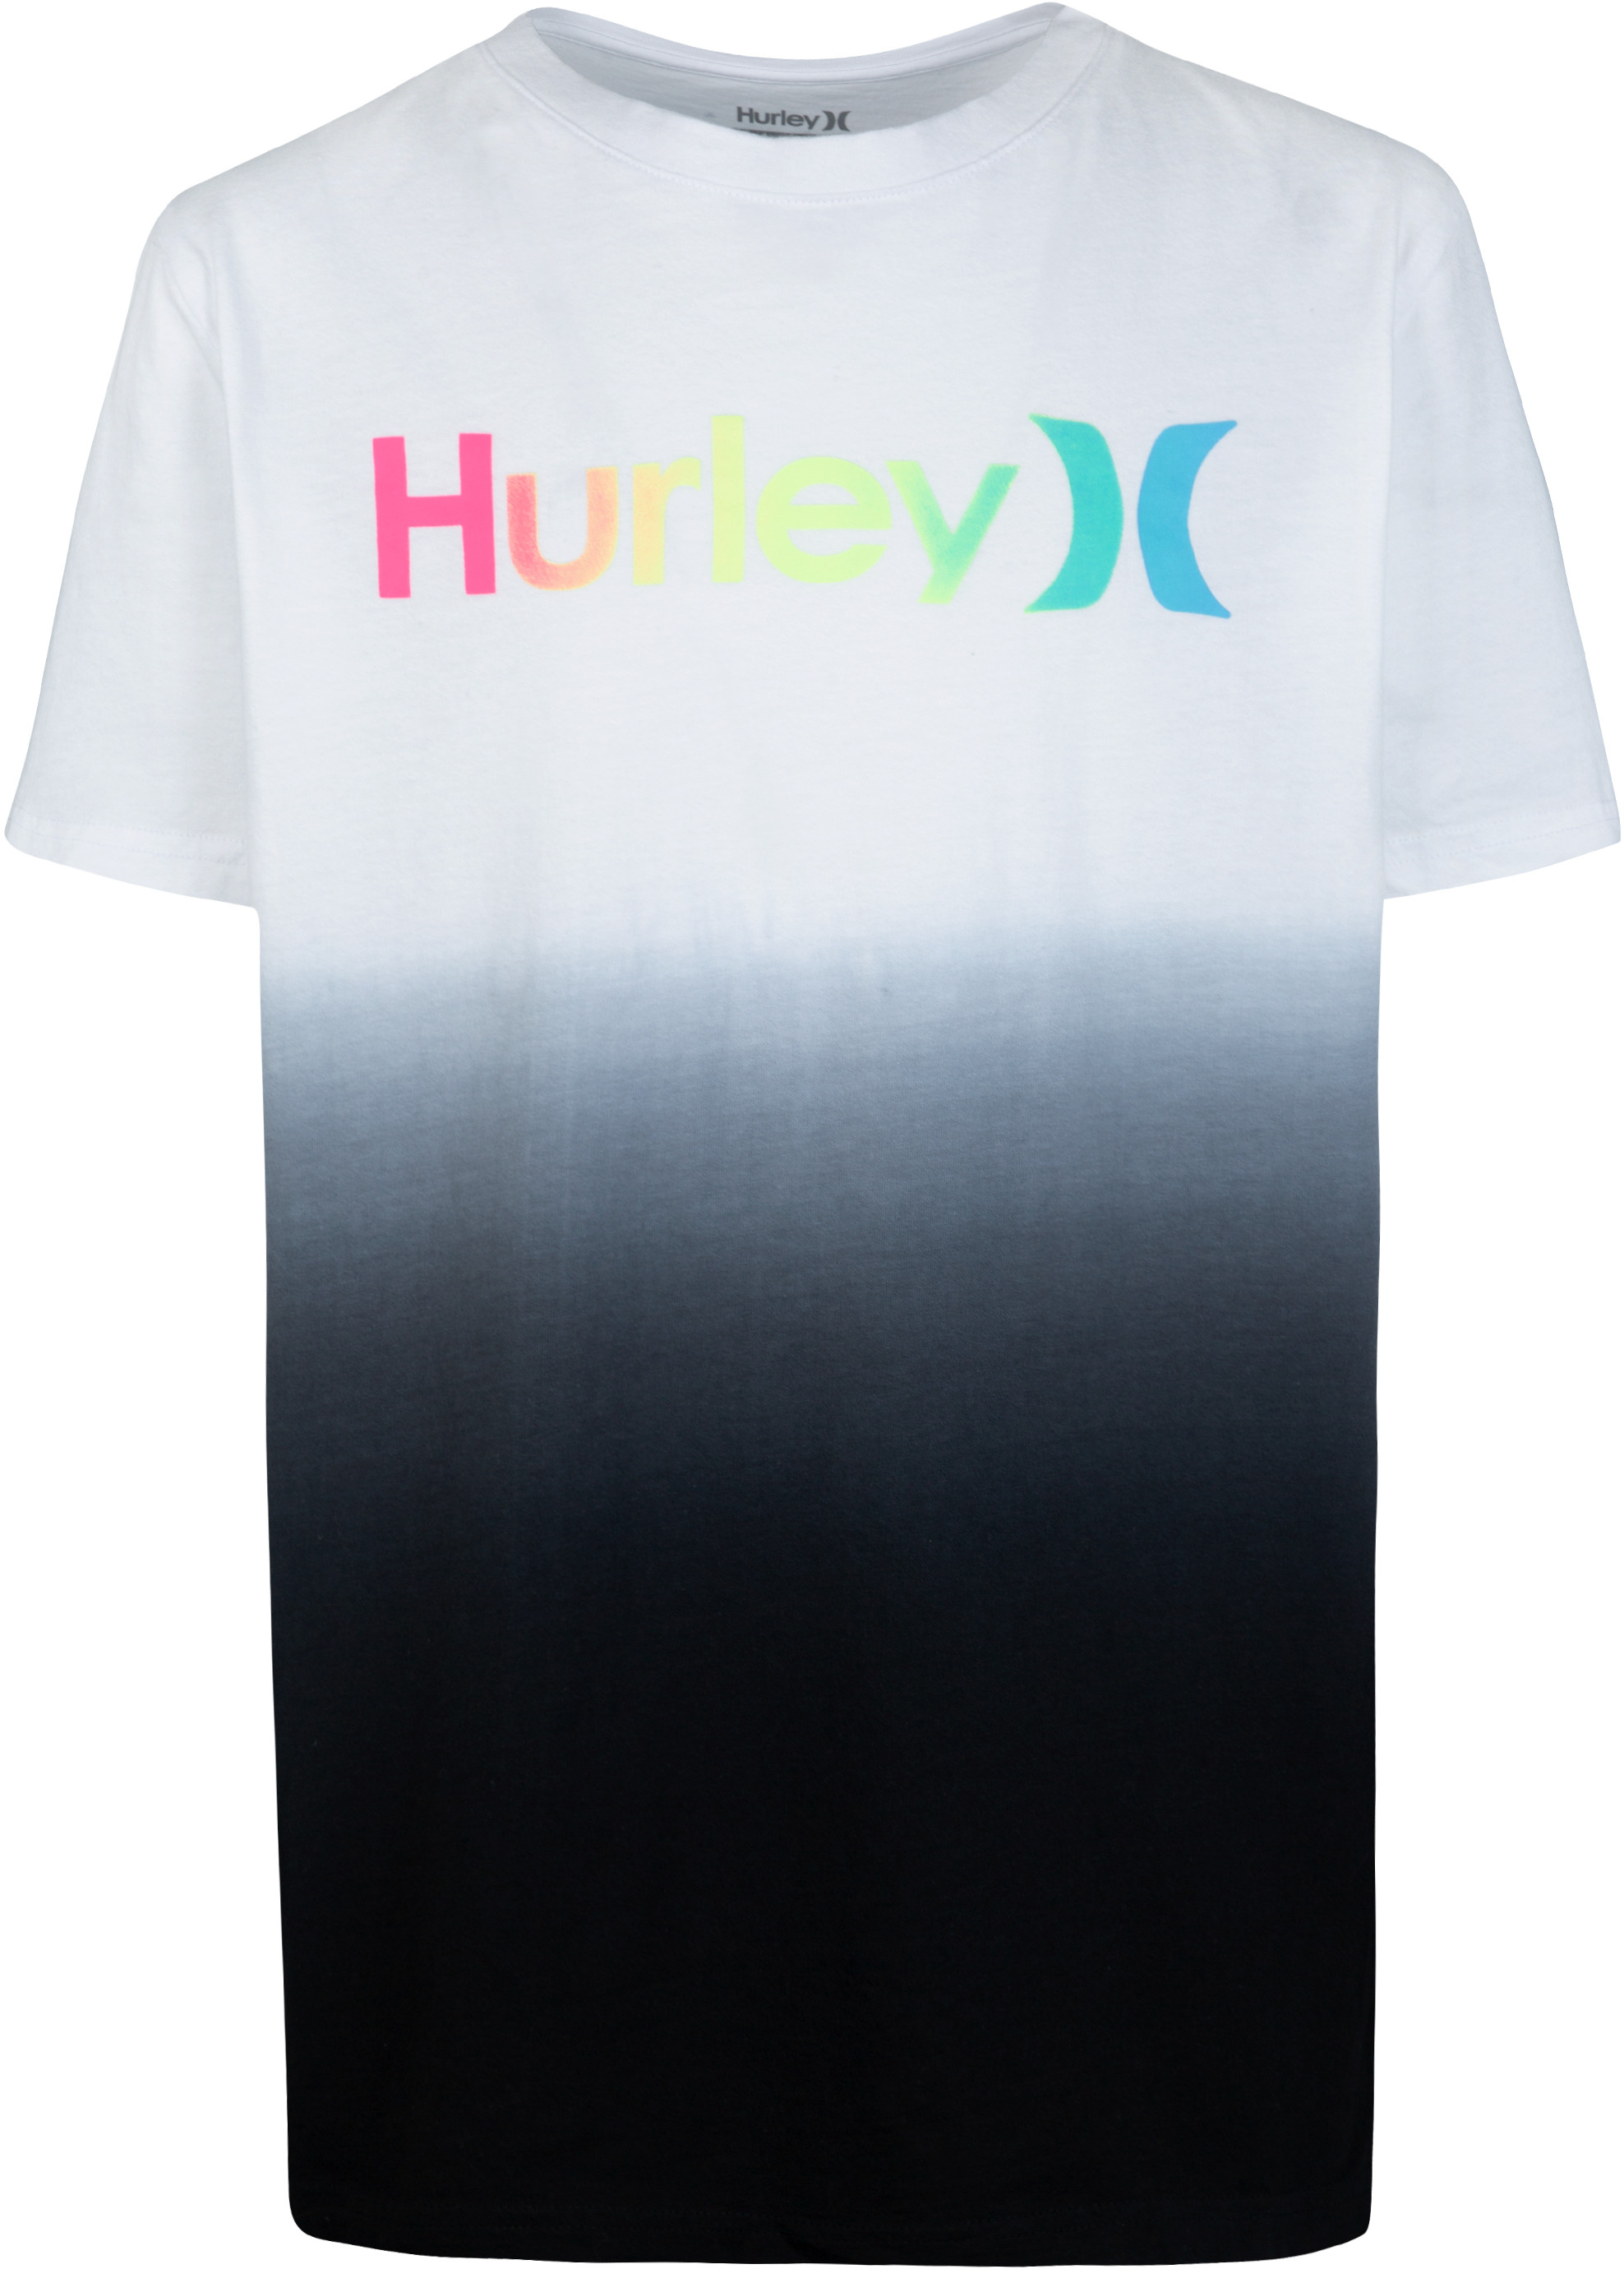 One and Only Dip-Dye T-Shirt (Big Kids) Hurley